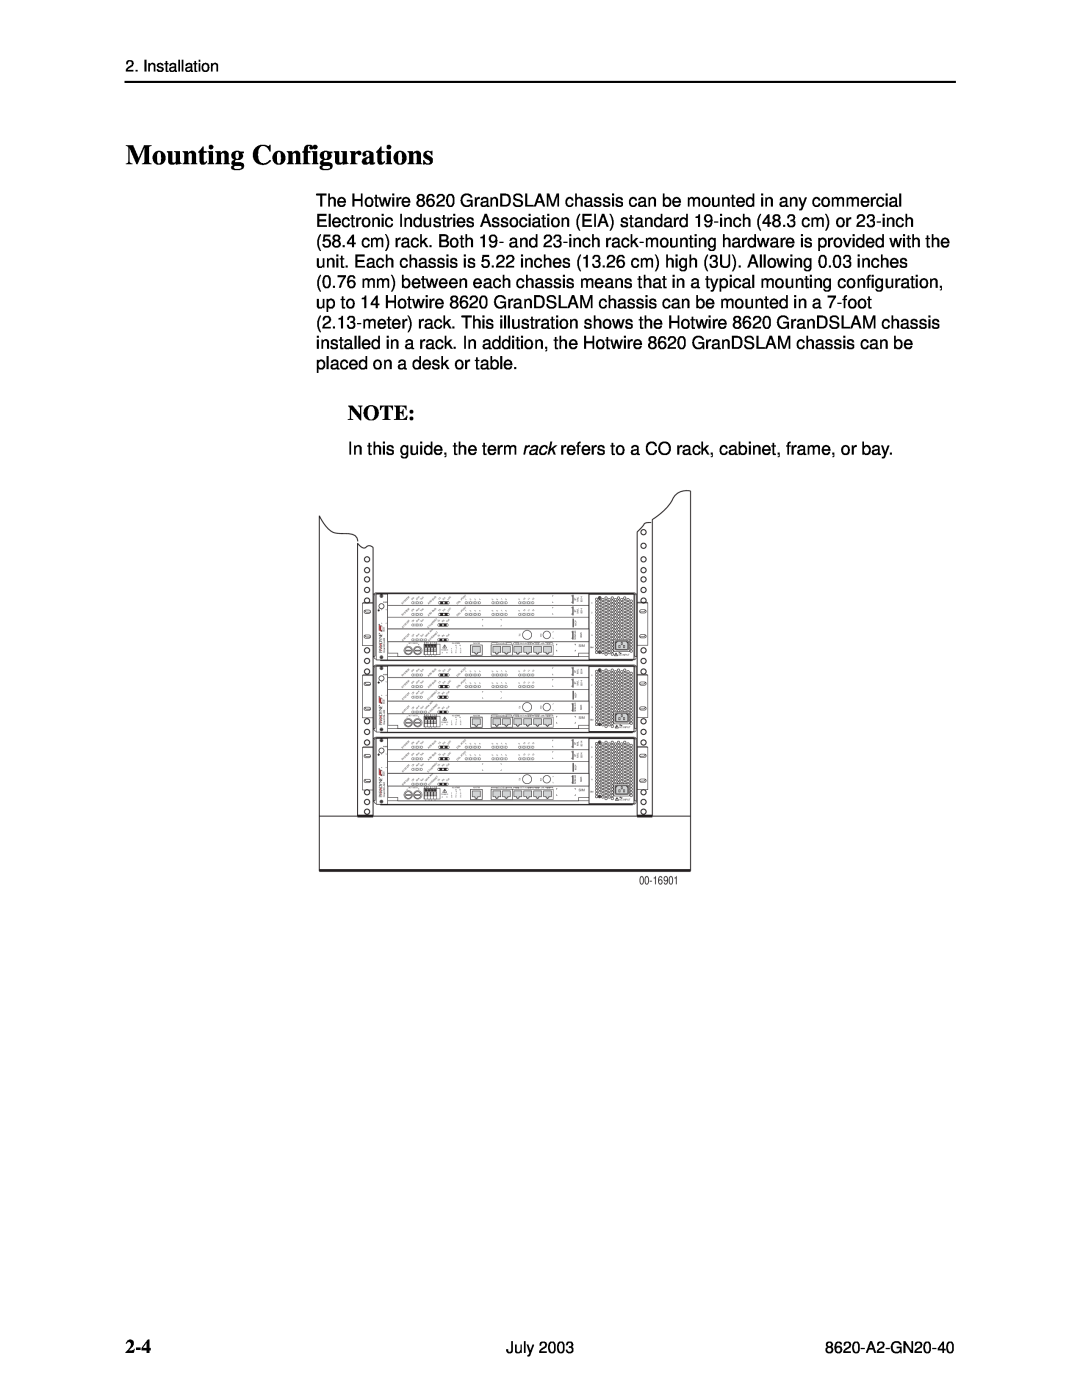 Paradyne Hotwire 8620 GranDSLAM Installation Guide manual Mounting Configurations 